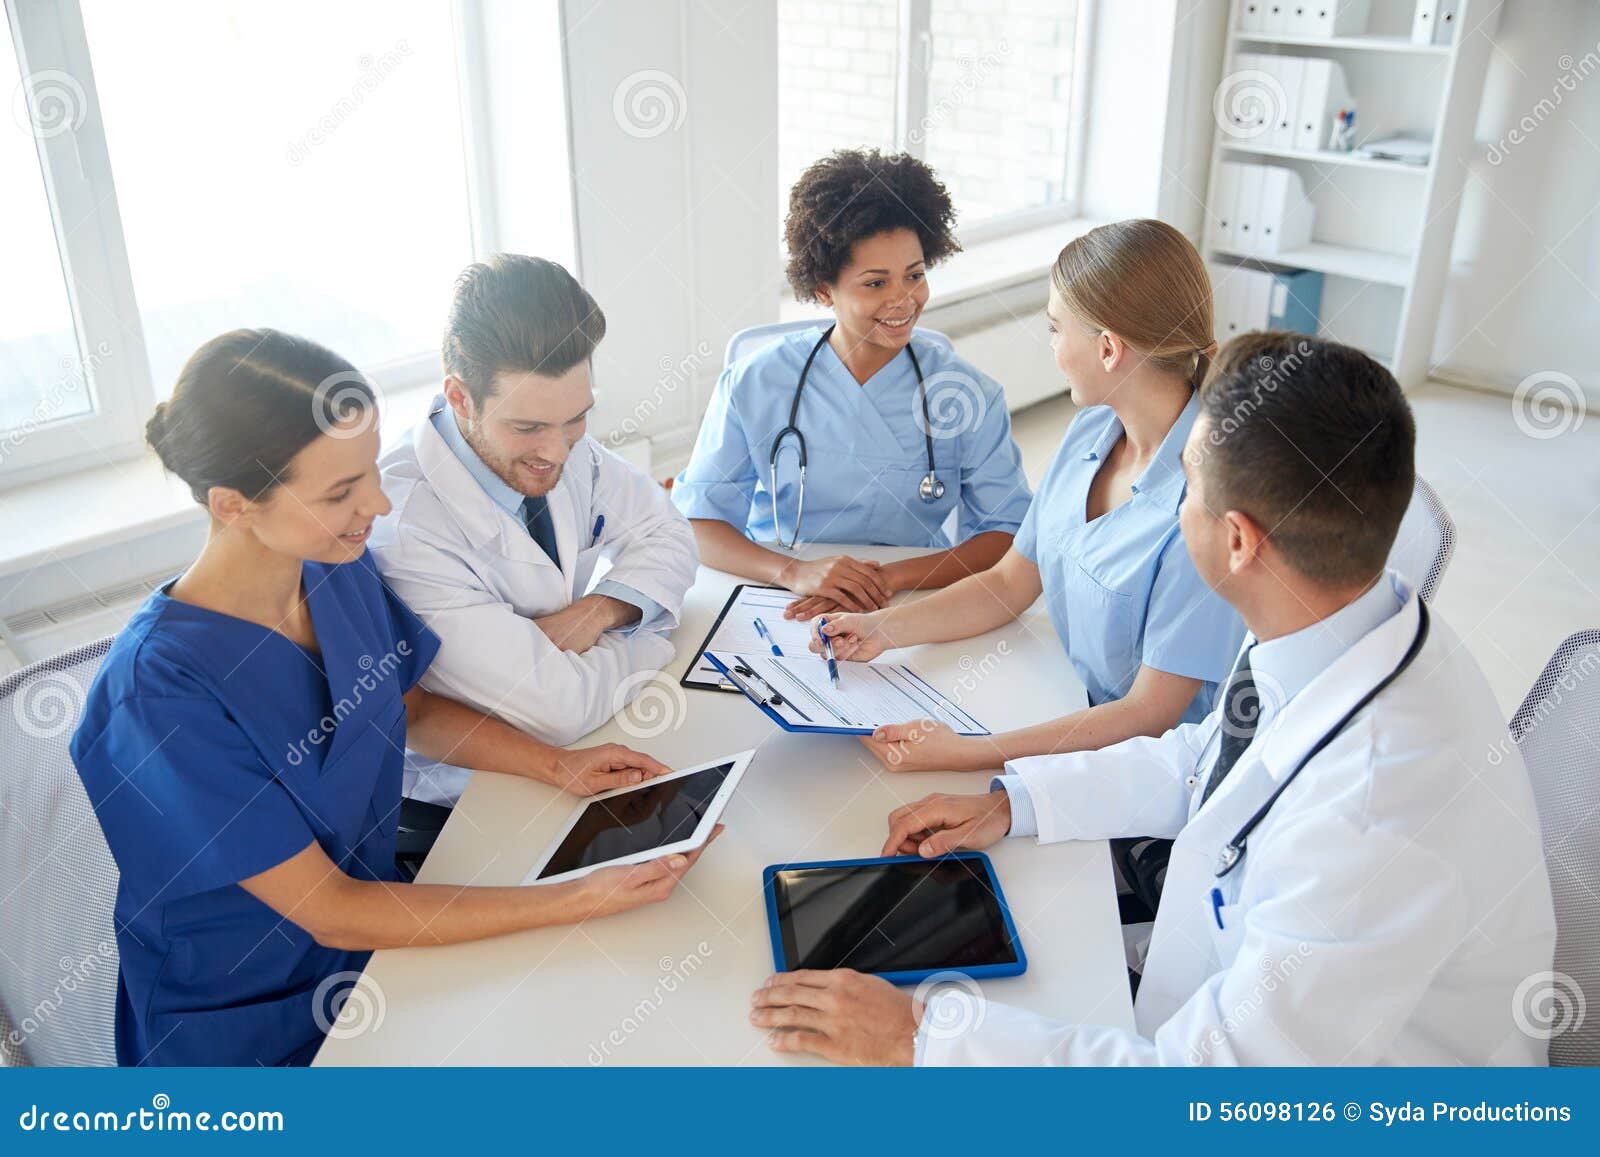 Group Of Happy Doctors Meeting At Hospital Office Stock ...